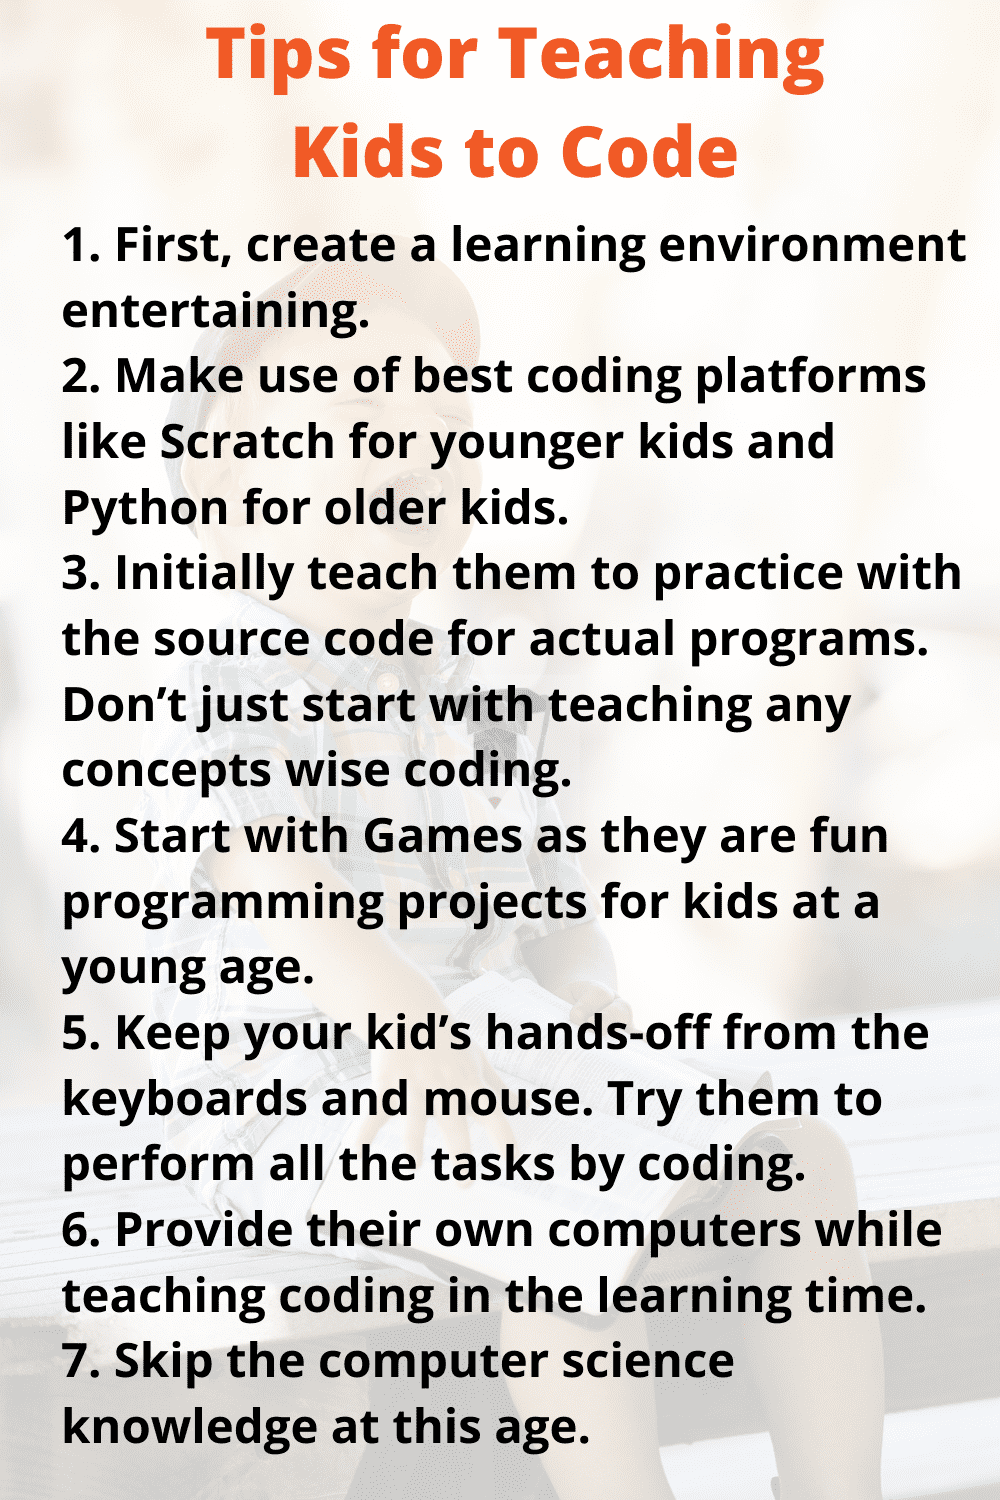 Tips for Teaching Kids to Code